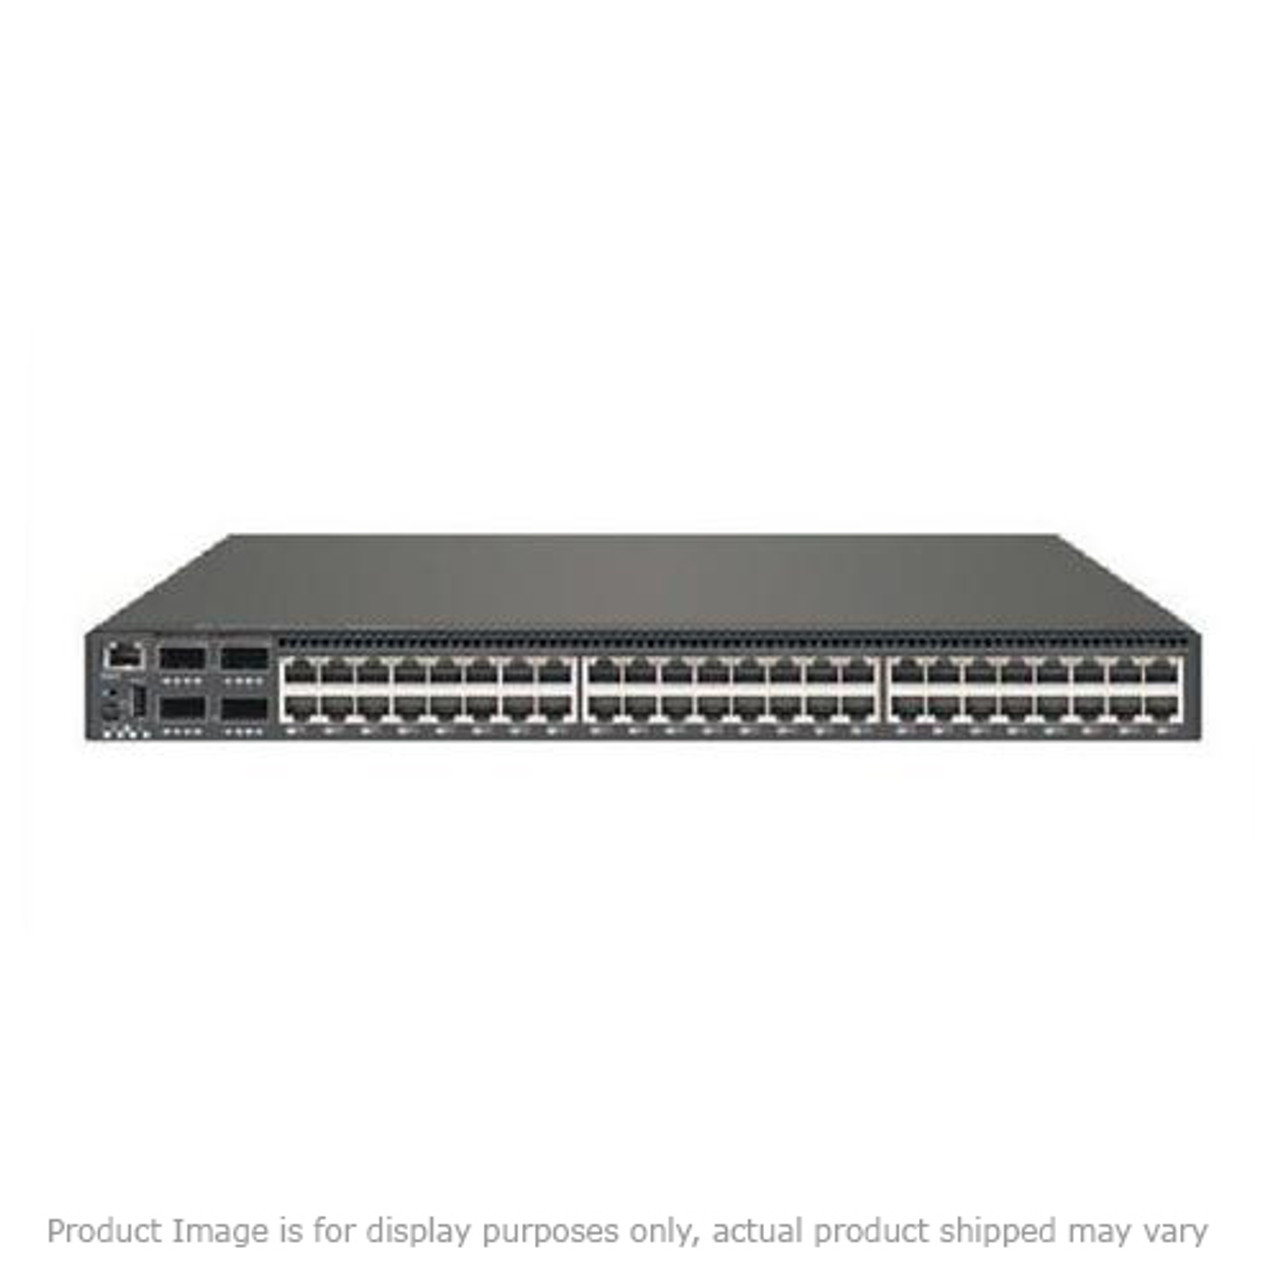 M5502R1000SX Avaya P550 Multilayer 2-port 1000base-sx Module With Integrated Routing (Refurbished)